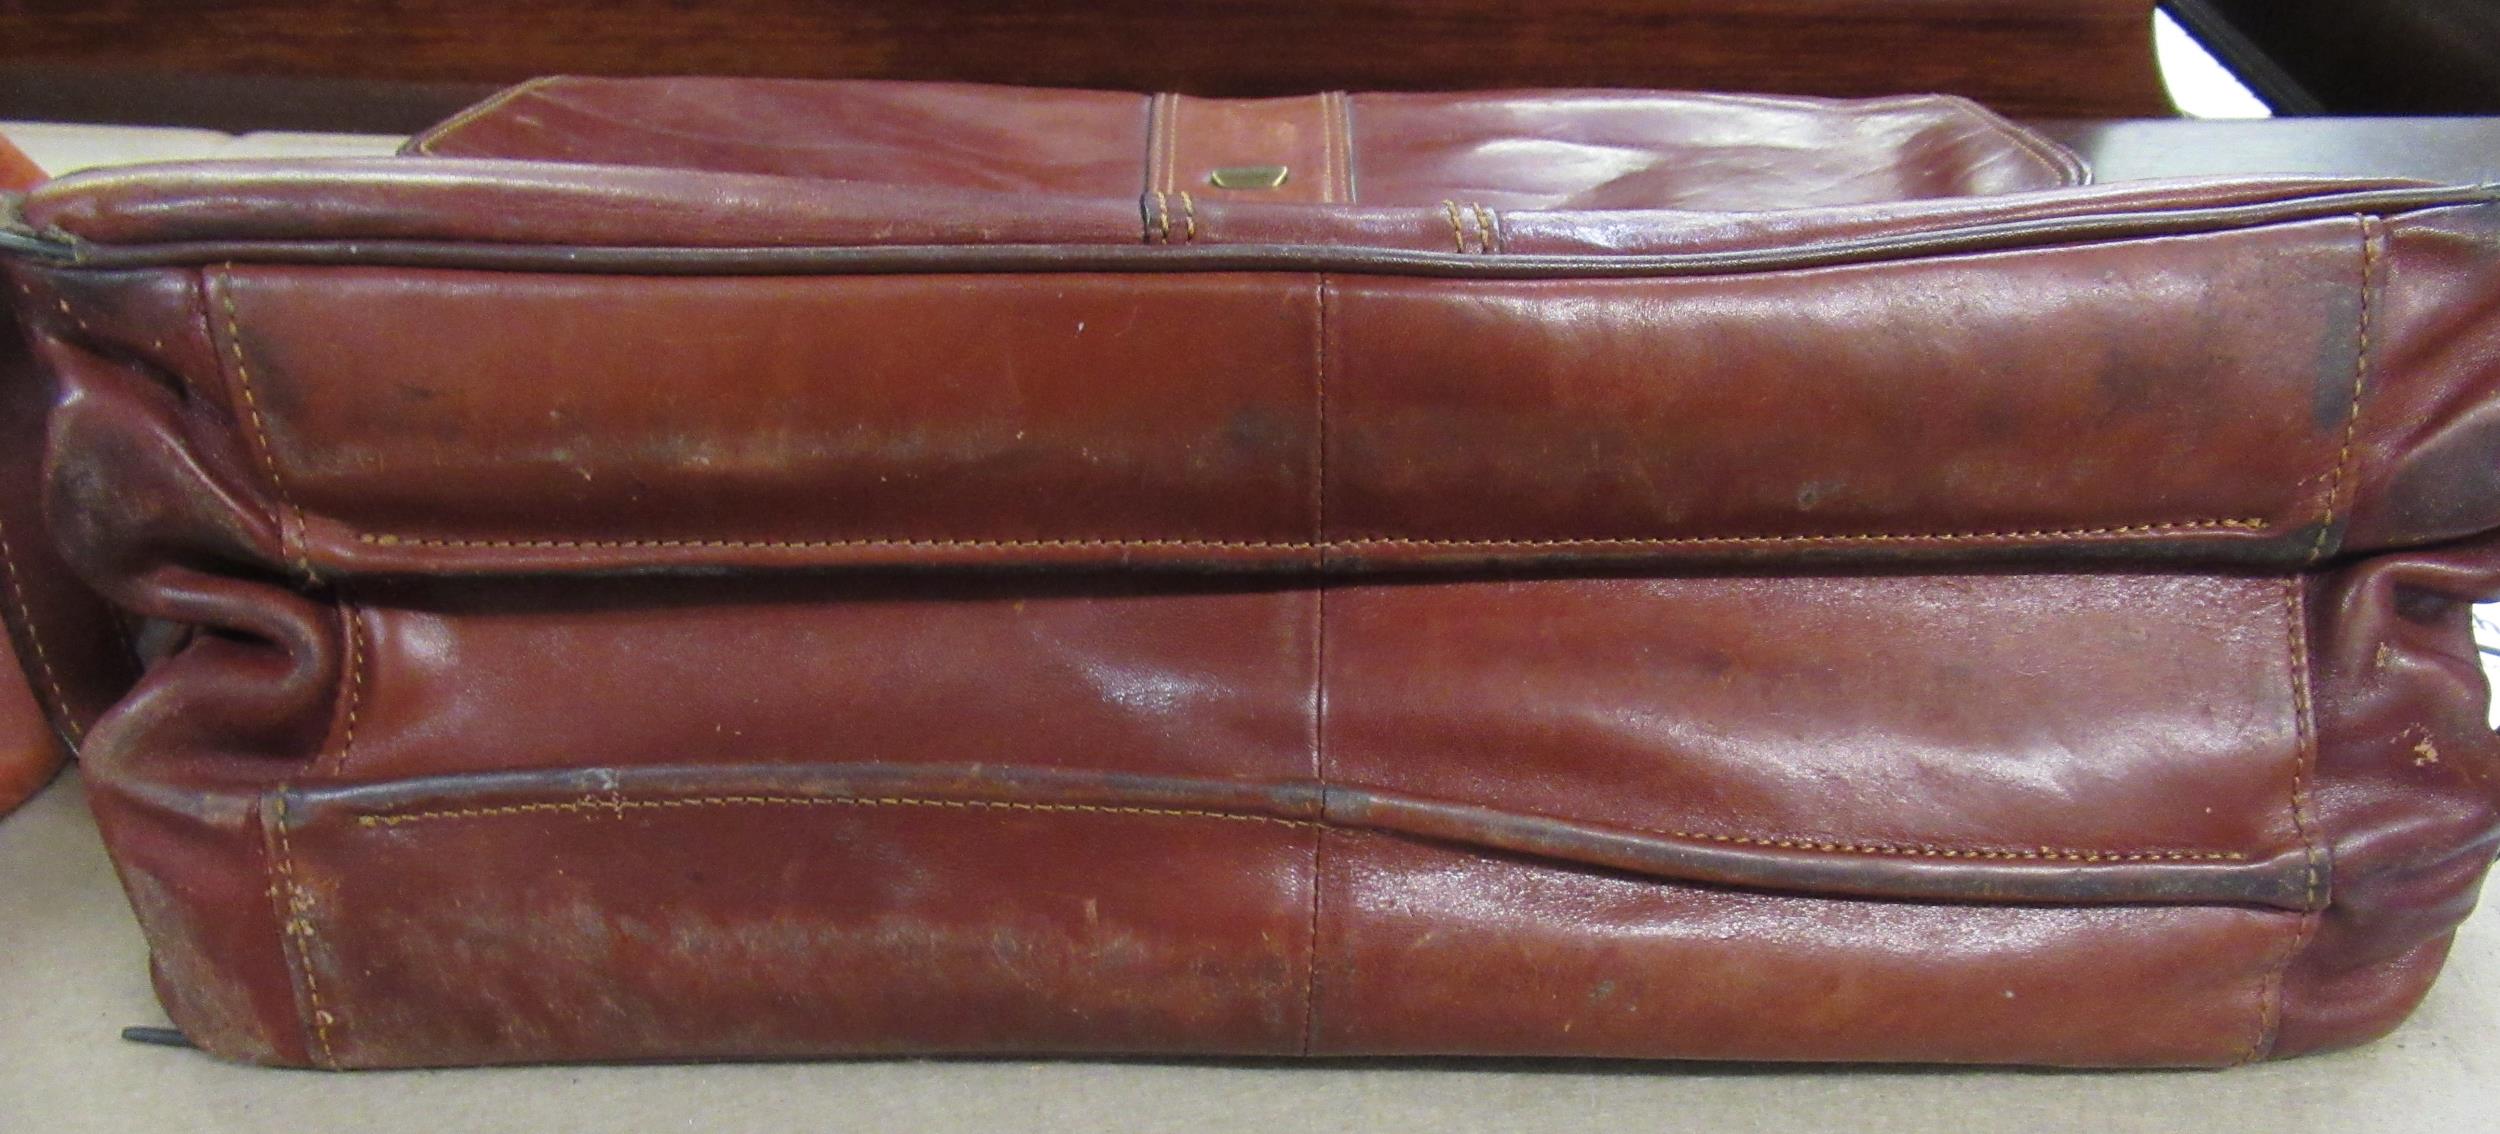 Tan leather attaché case by Piquadro, together with another leather briefcase Condition as shown - Image 7 of 17